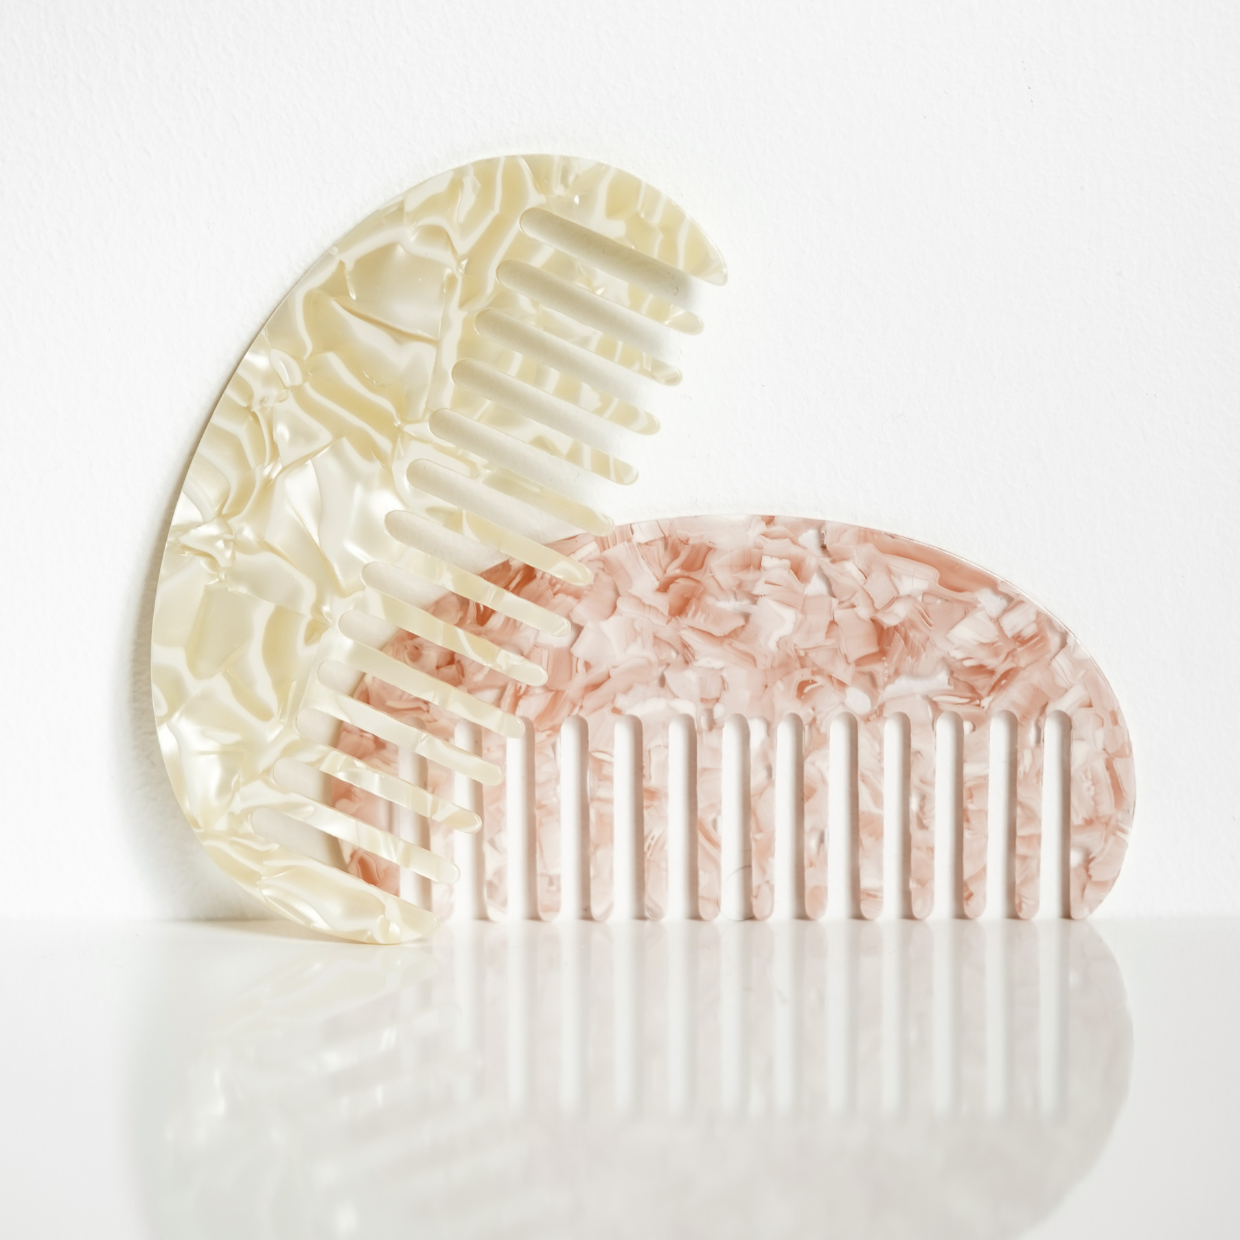 Hair Comb in White Shell